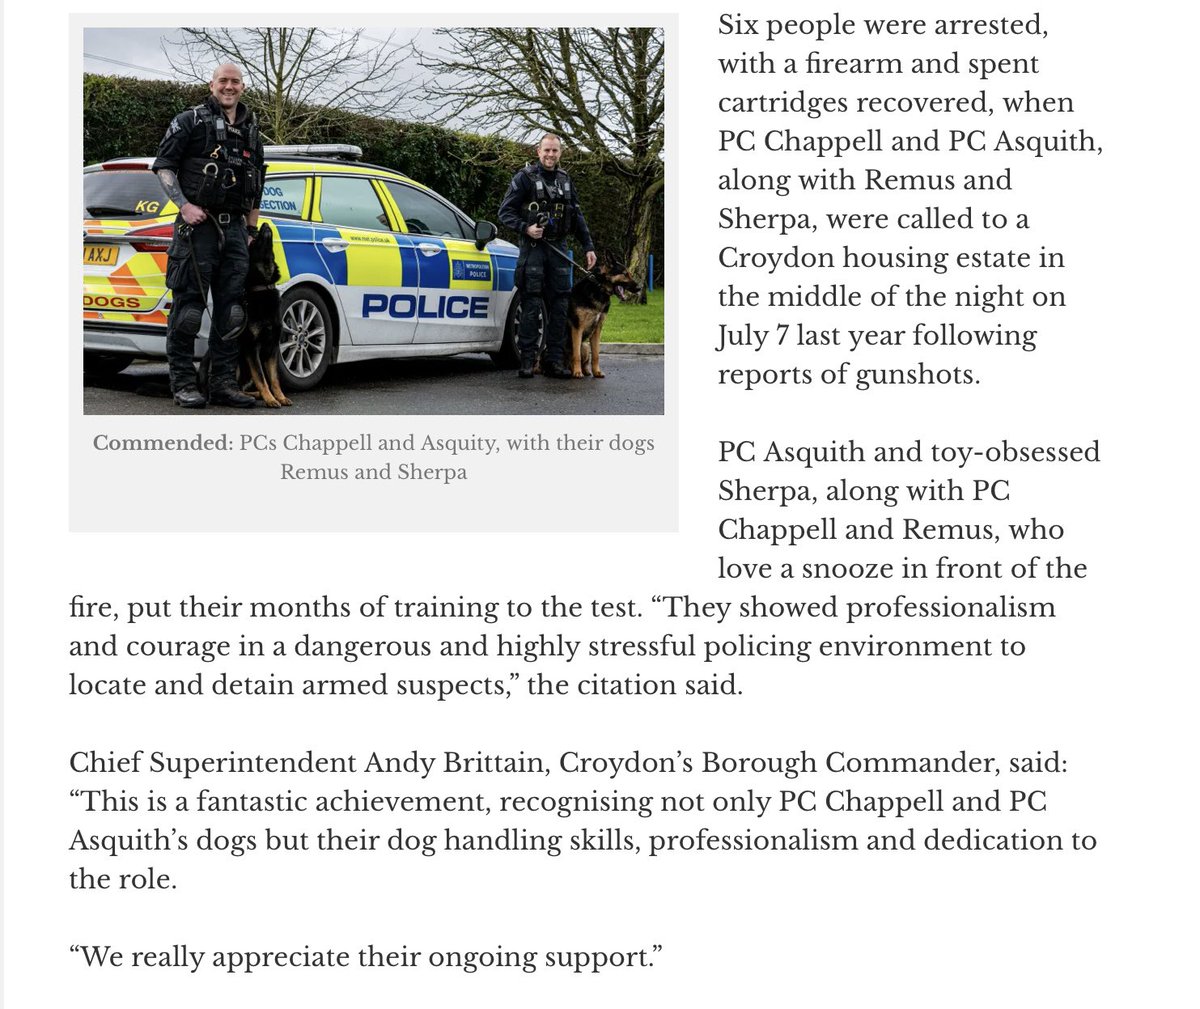 It’s always good to see awards coming from @PoliceChiefs in recognition of brilliant Dog Teams Well done PCs Chappell & Asquith + the Amazing Remus & Sherpa @MetTaskforce @lrpduk @BTPDogs @AssociationRPDs @The_NFRSA @Chappers2013 @PD_DexterWBDOG @K9memorialUk @KeoghHeath